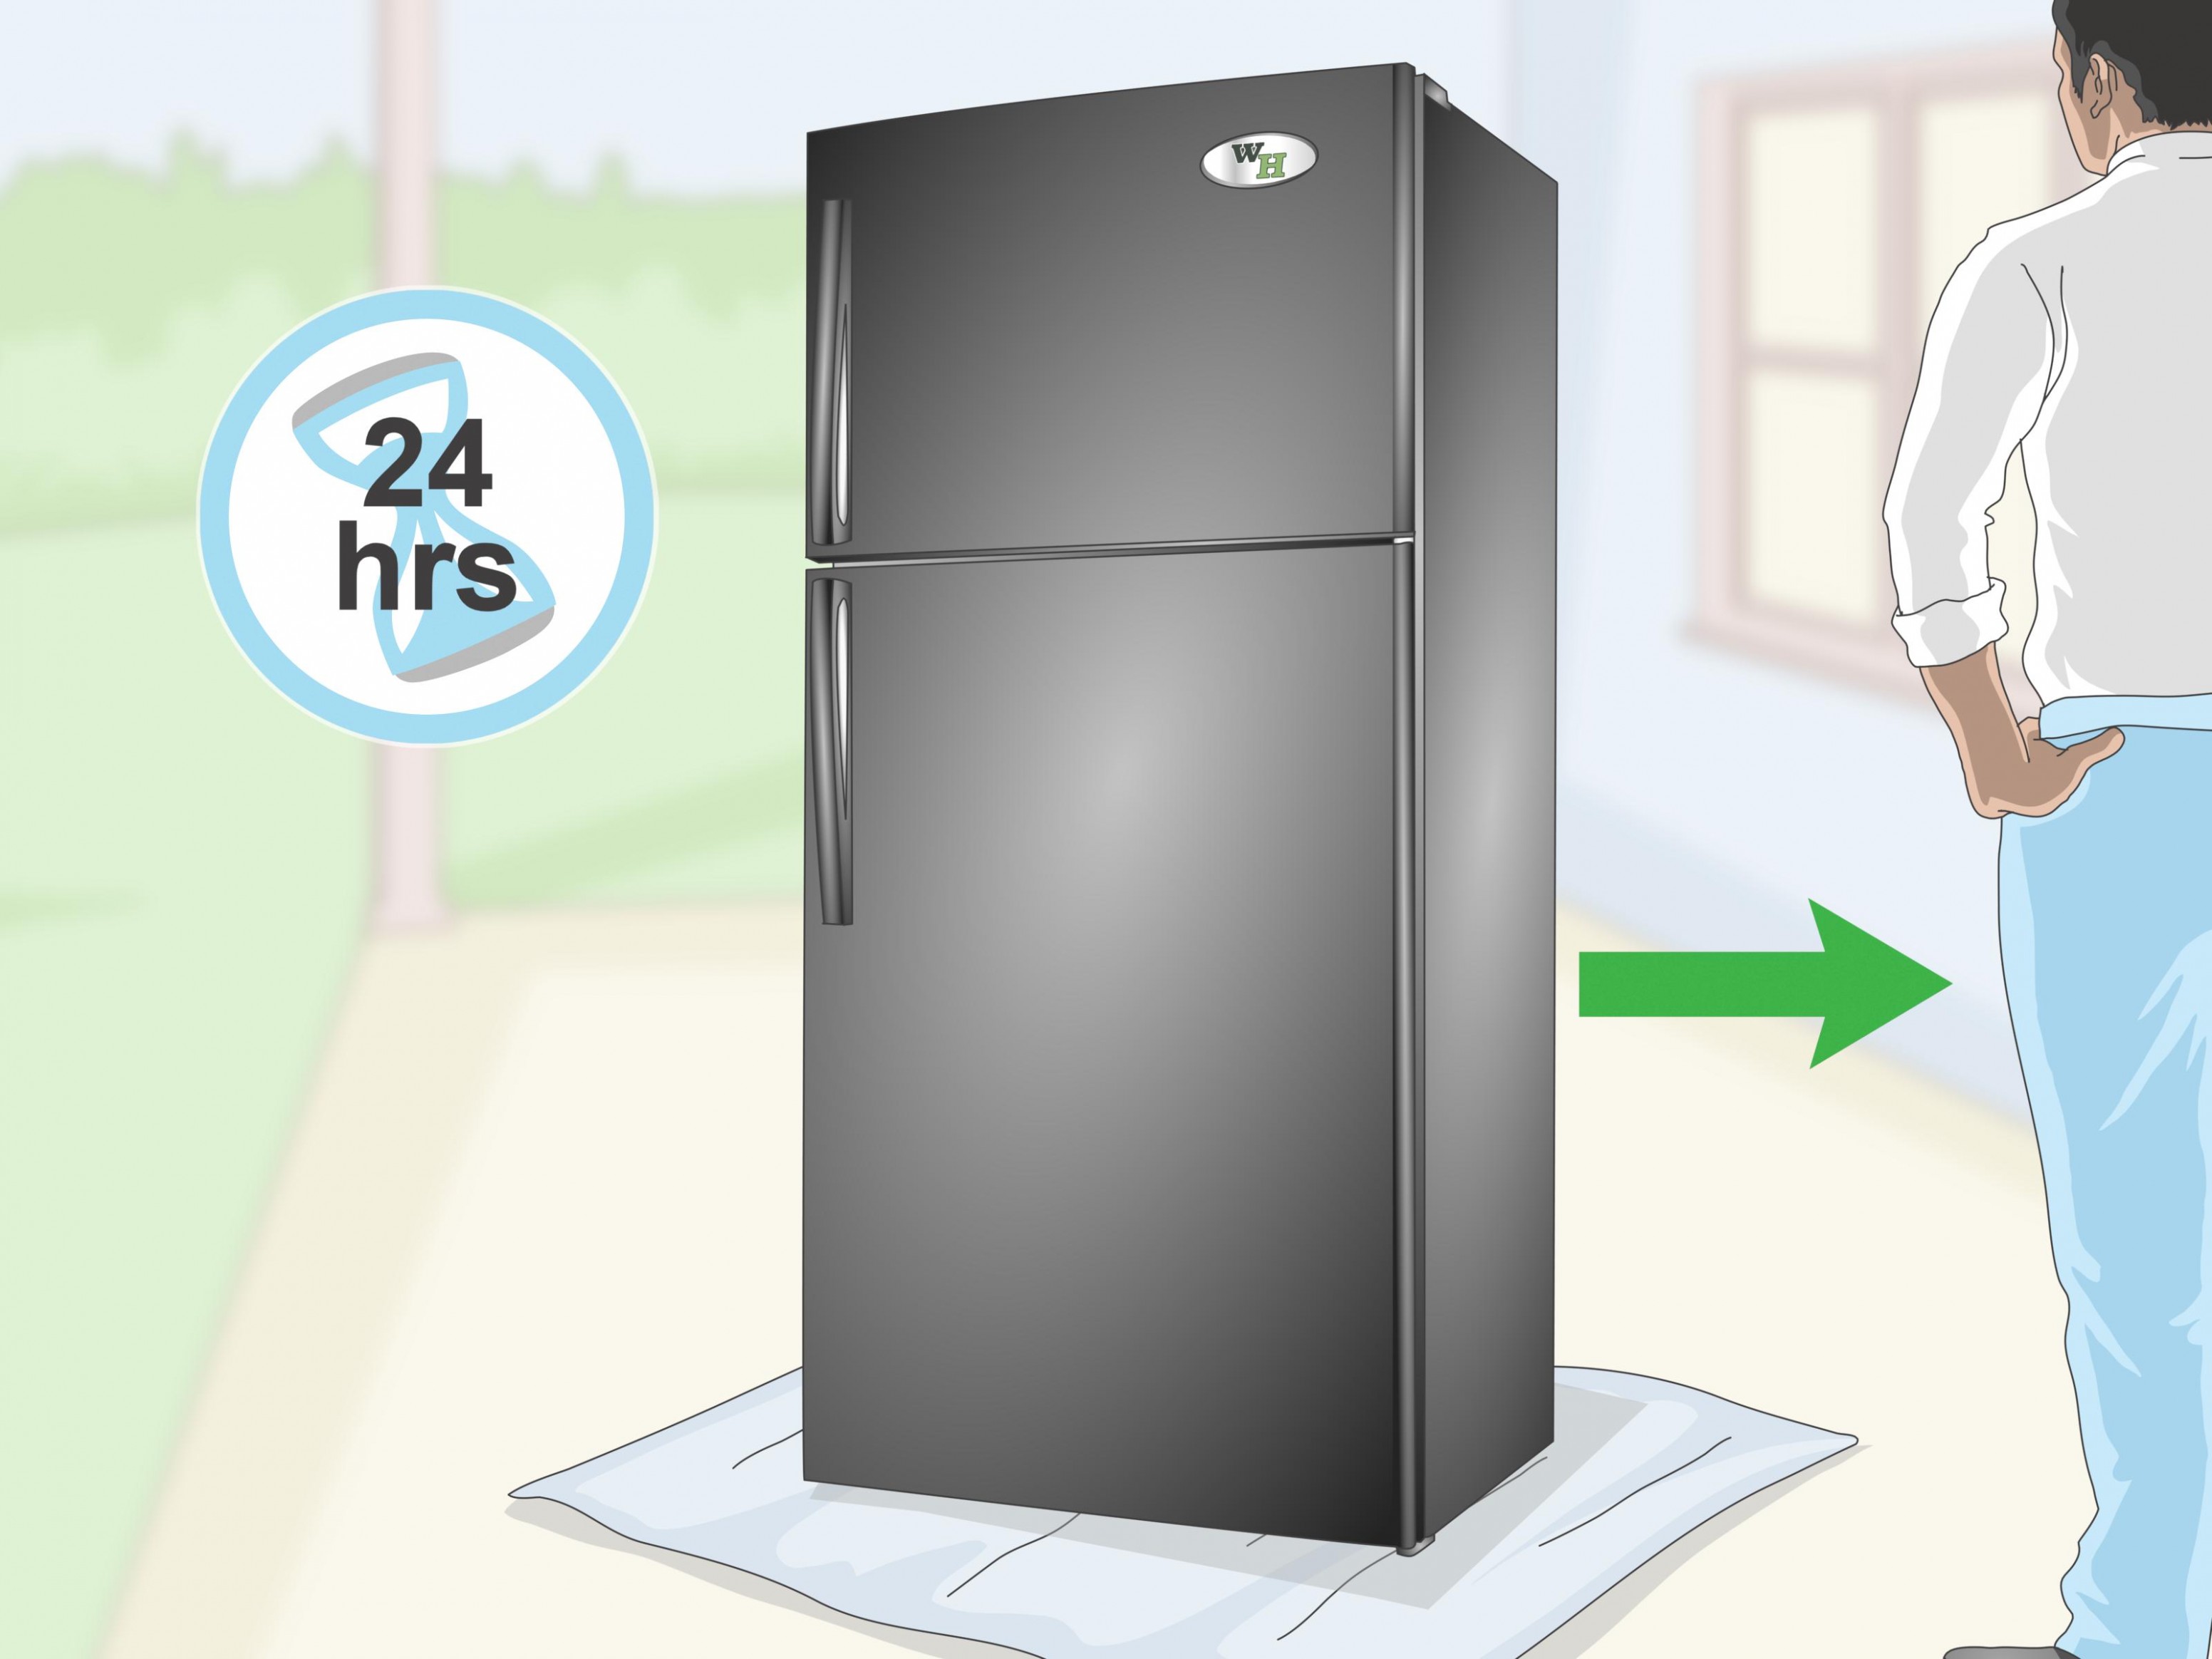 6 Ways To Paint A Refrigerator Wikihow Can You Paint Chalkboard Paint On Metal